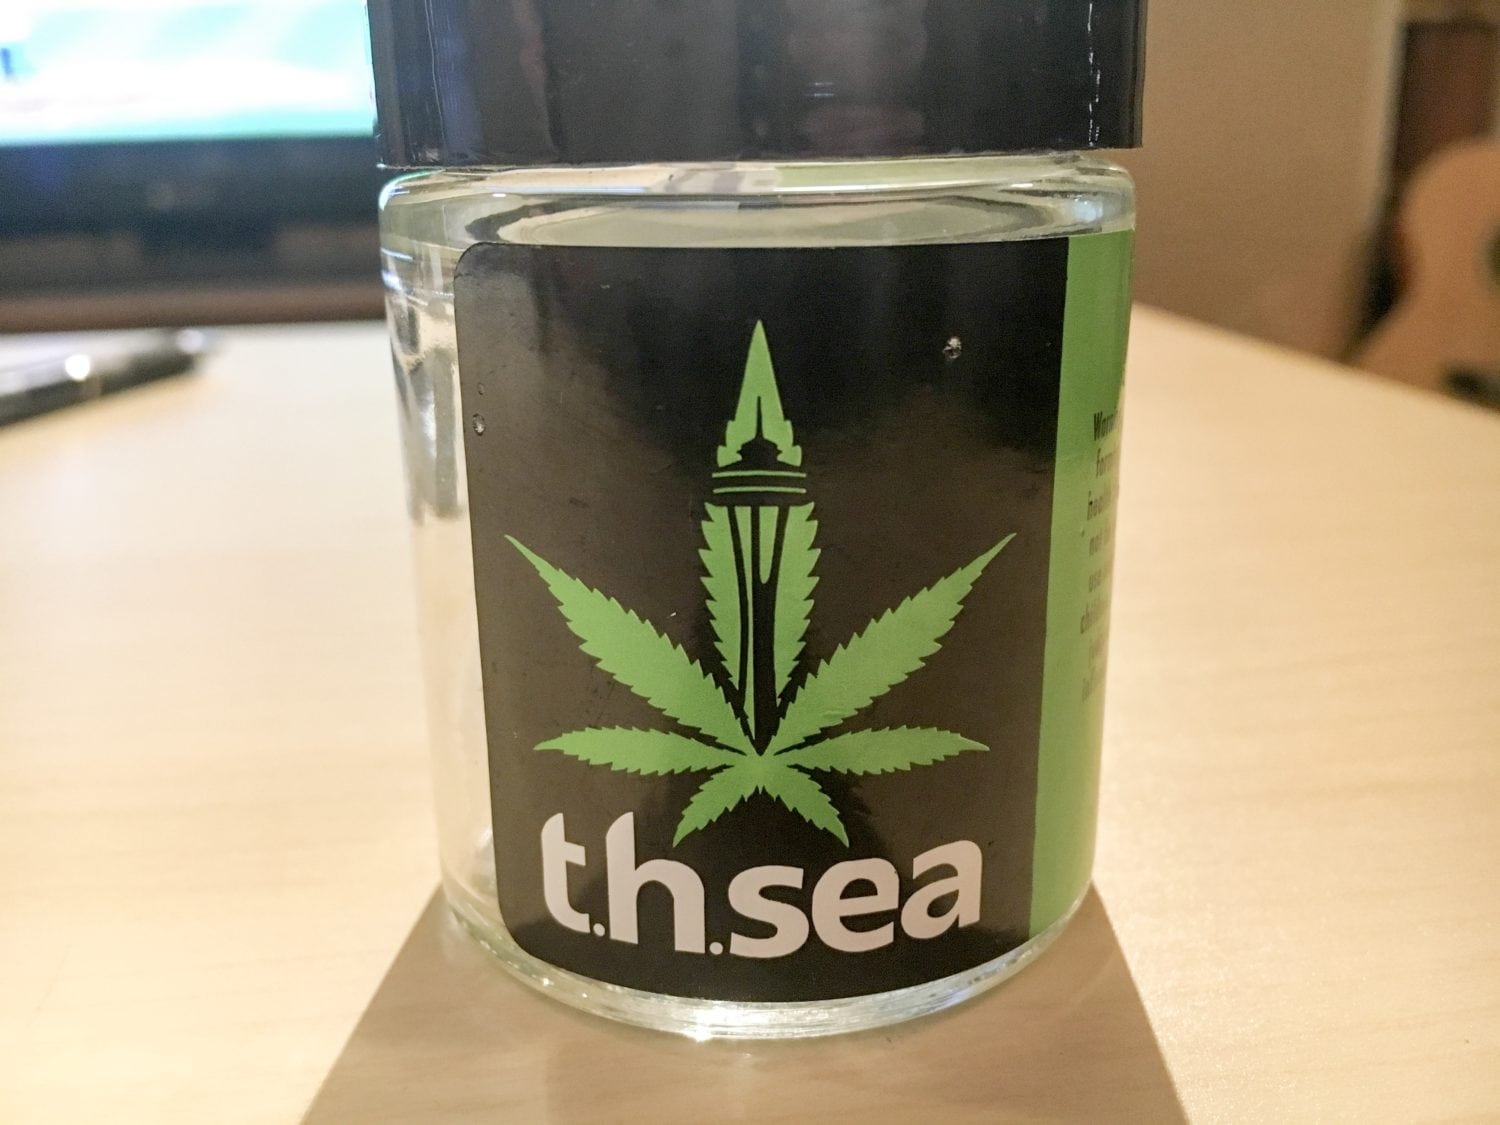 A Real Review of The White Skywalker Strain From t.h.sea